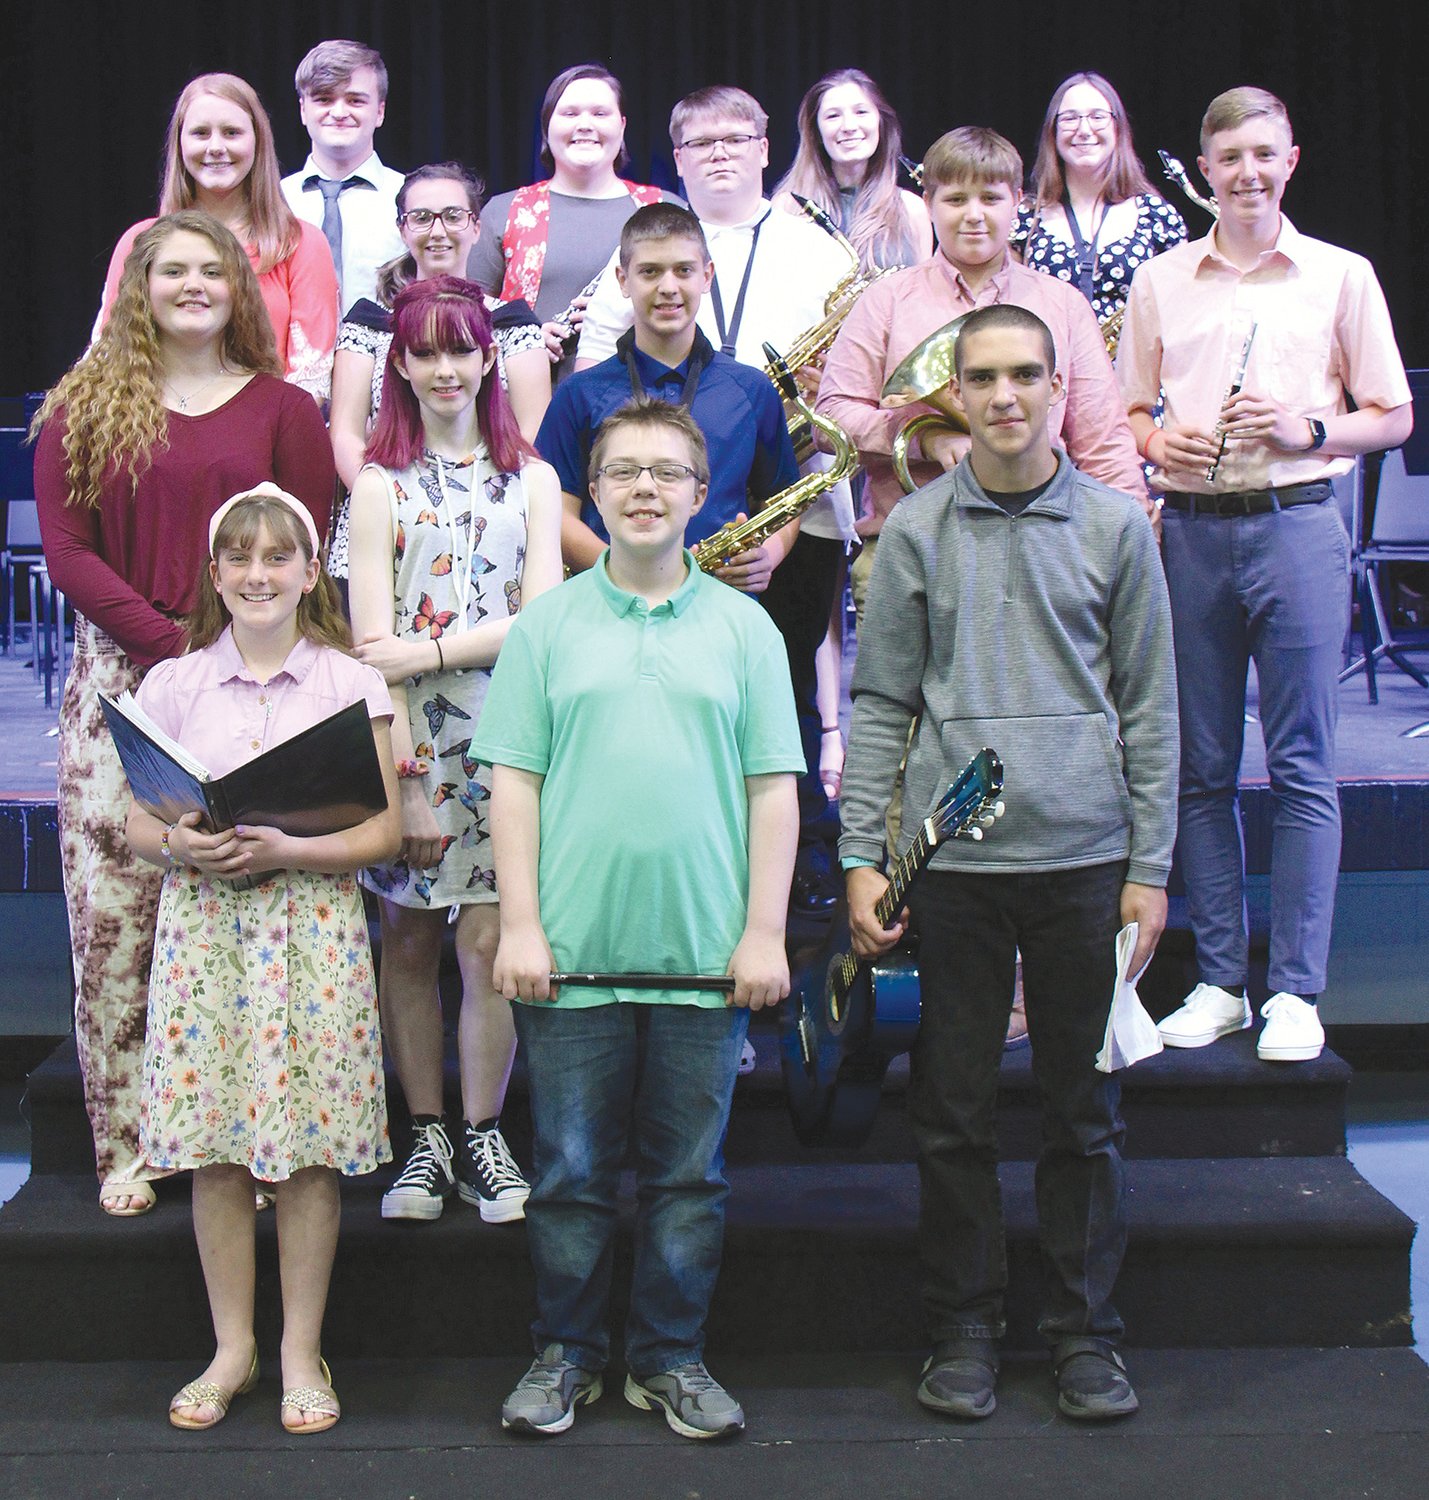 Earning music awards are front row, Ella Lacy, Lucas Hutchens and Caylum Wills; second row, Shelby Robertson, Novel Crabtree and Justin Cooper; third row, Jenna McVay, Kaitlyn McMichael, Drew Hybarger, Tucker Conley and Treyton Burgess; and back row, Lucas Branson, Ashlyn Hybarger, Abigail Nicholas and Alexa Blackwell. Not pictured are Kody Cheesman, Carly Newnum and Shana Stafford.